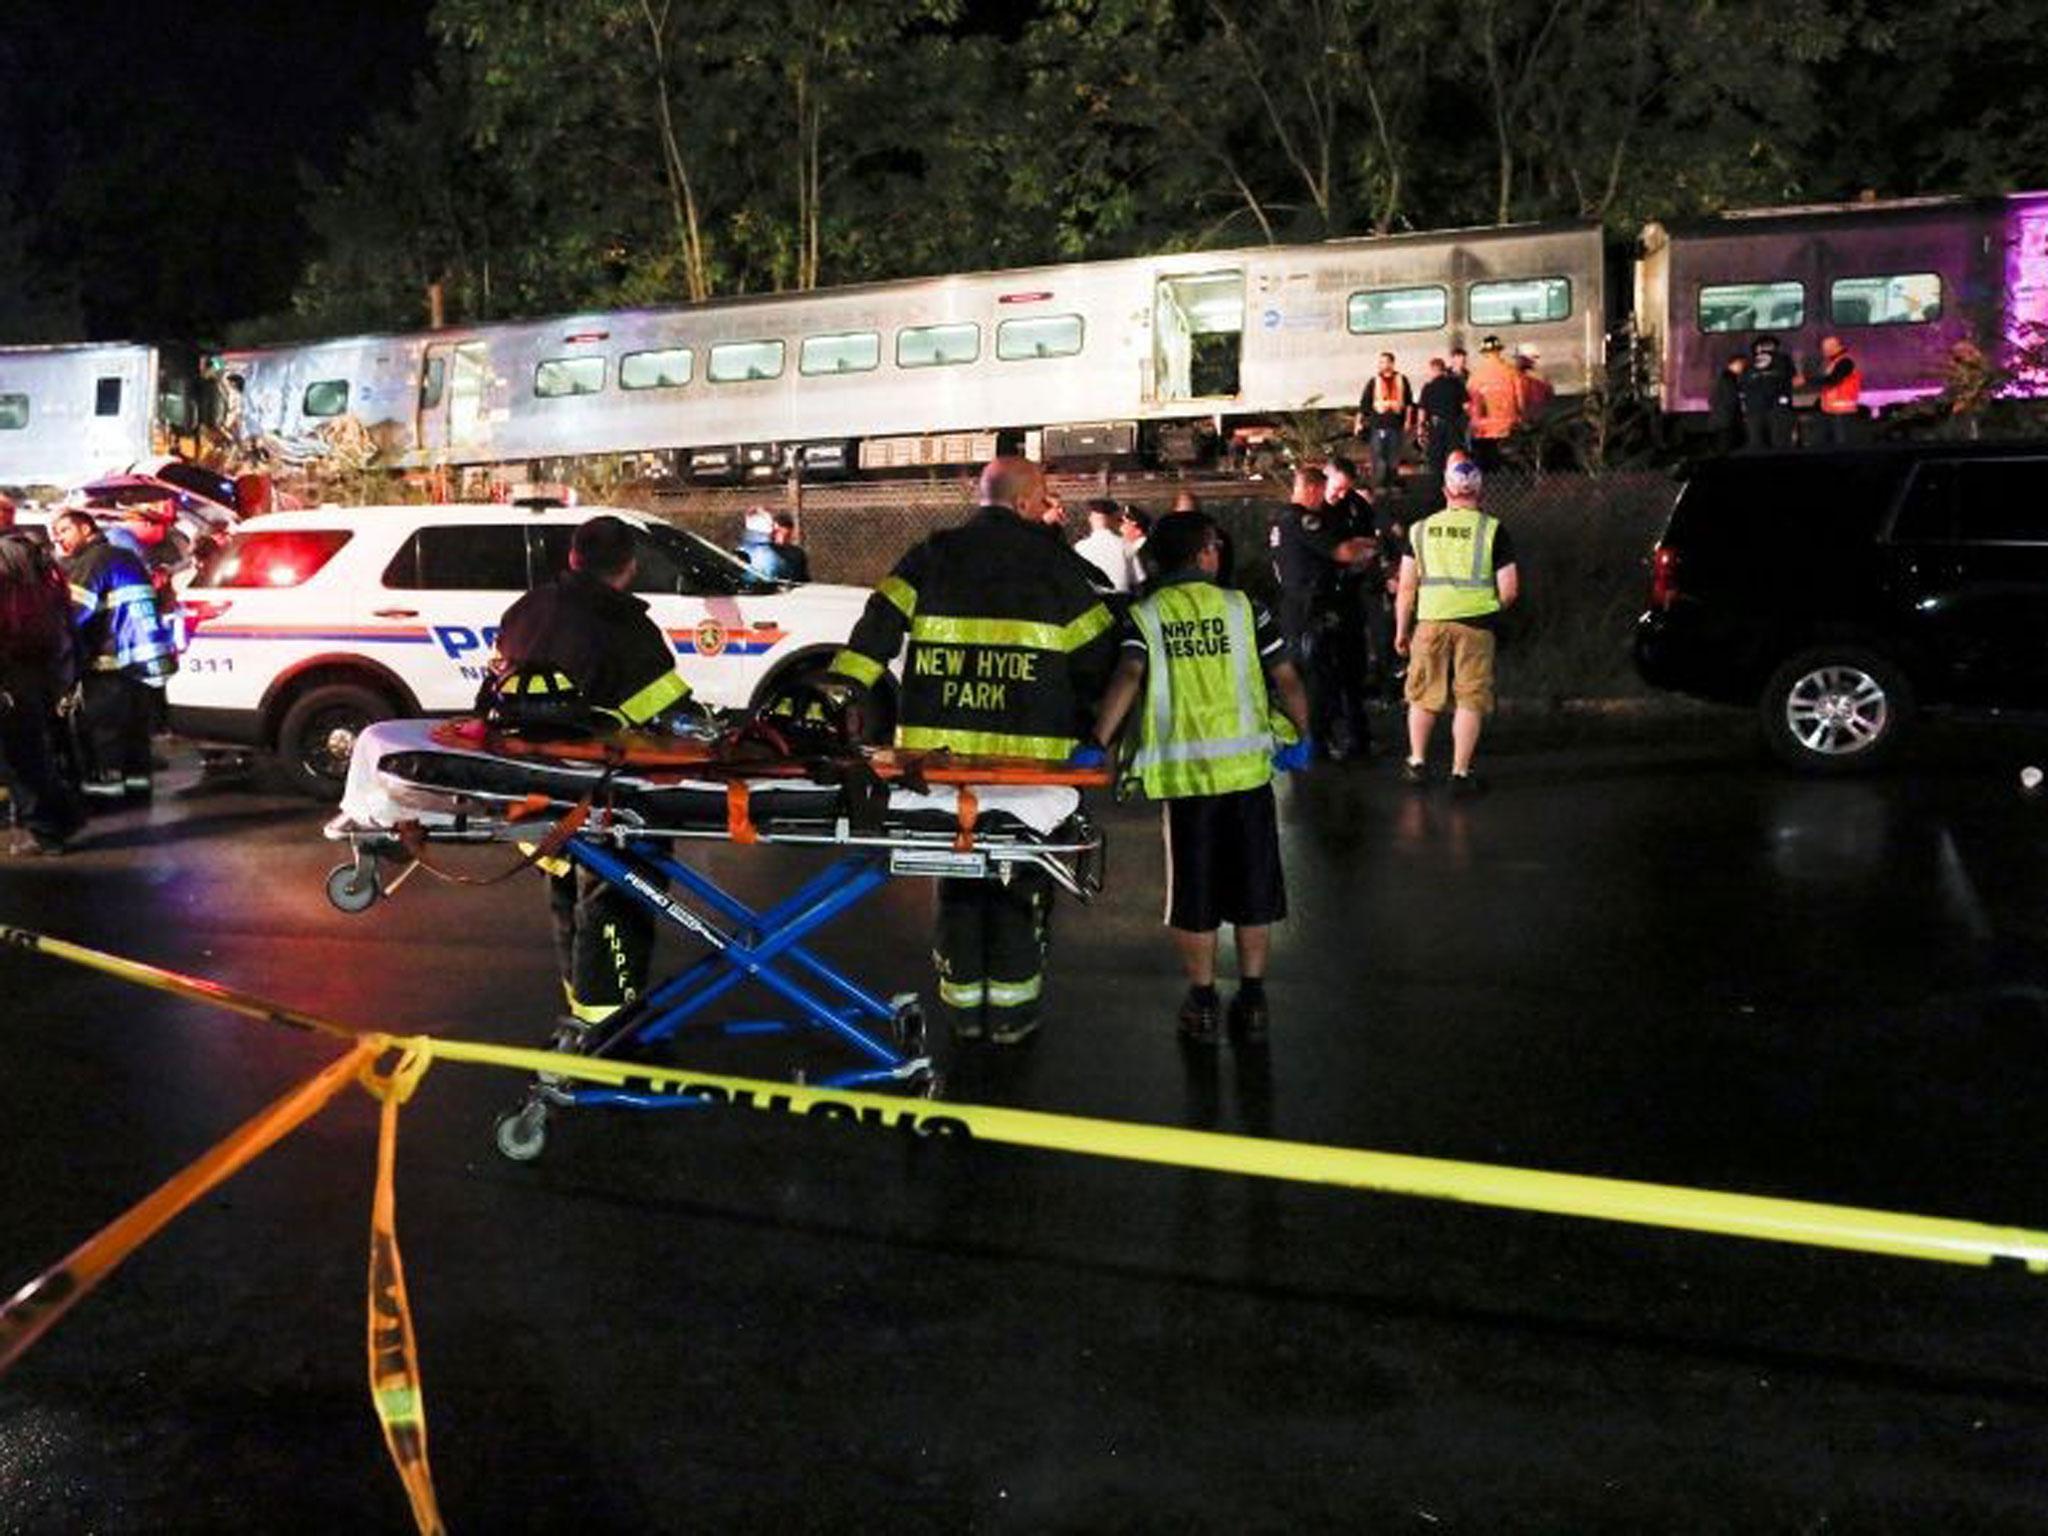 Emergency responders attend to a call of a train derailed near the community of New Hyde Park on Long Island in New York